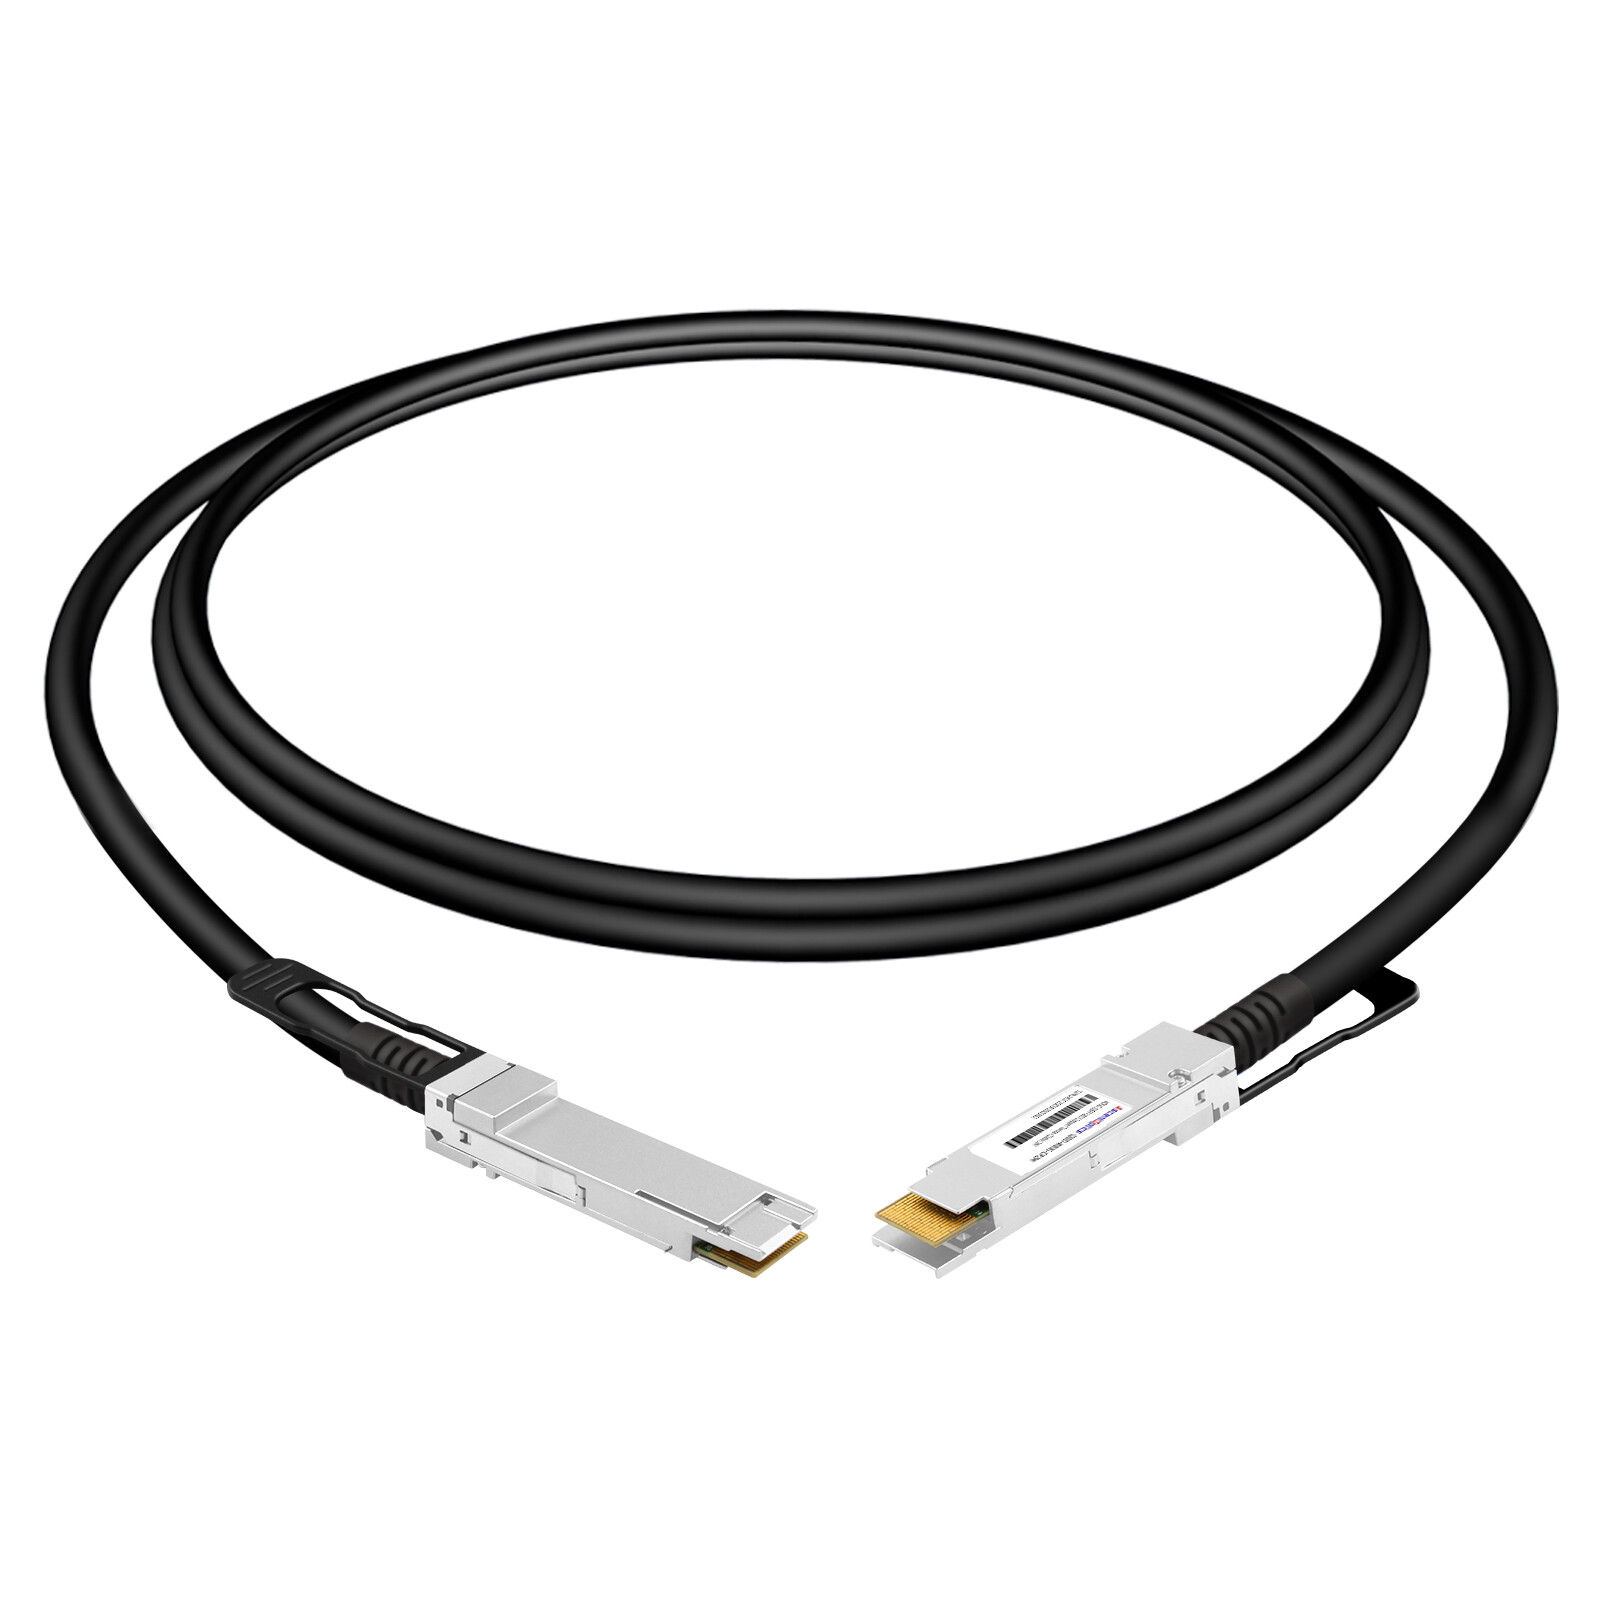 400G QSFP-DD Copper DAC Cable,2 Meters,Passive